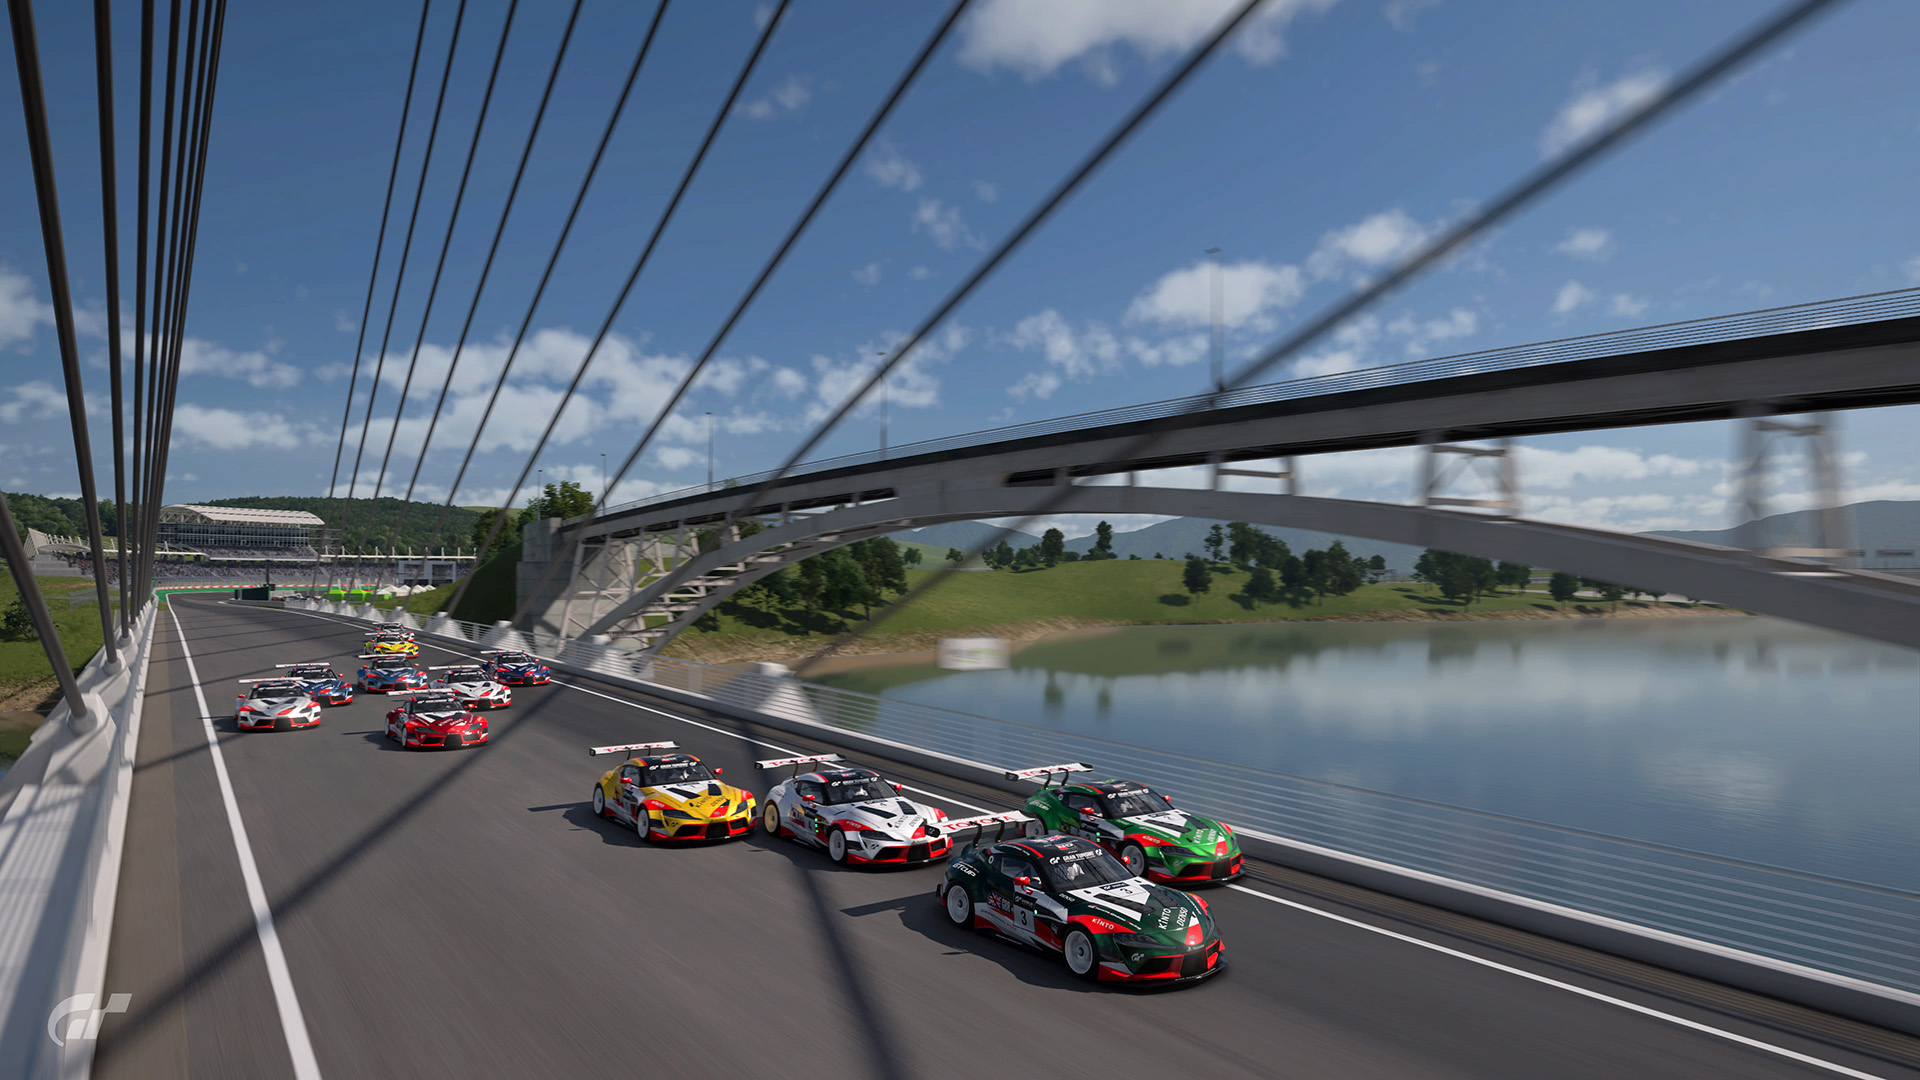 Gran Turismo boss says he’s “considering and looking into” PC port